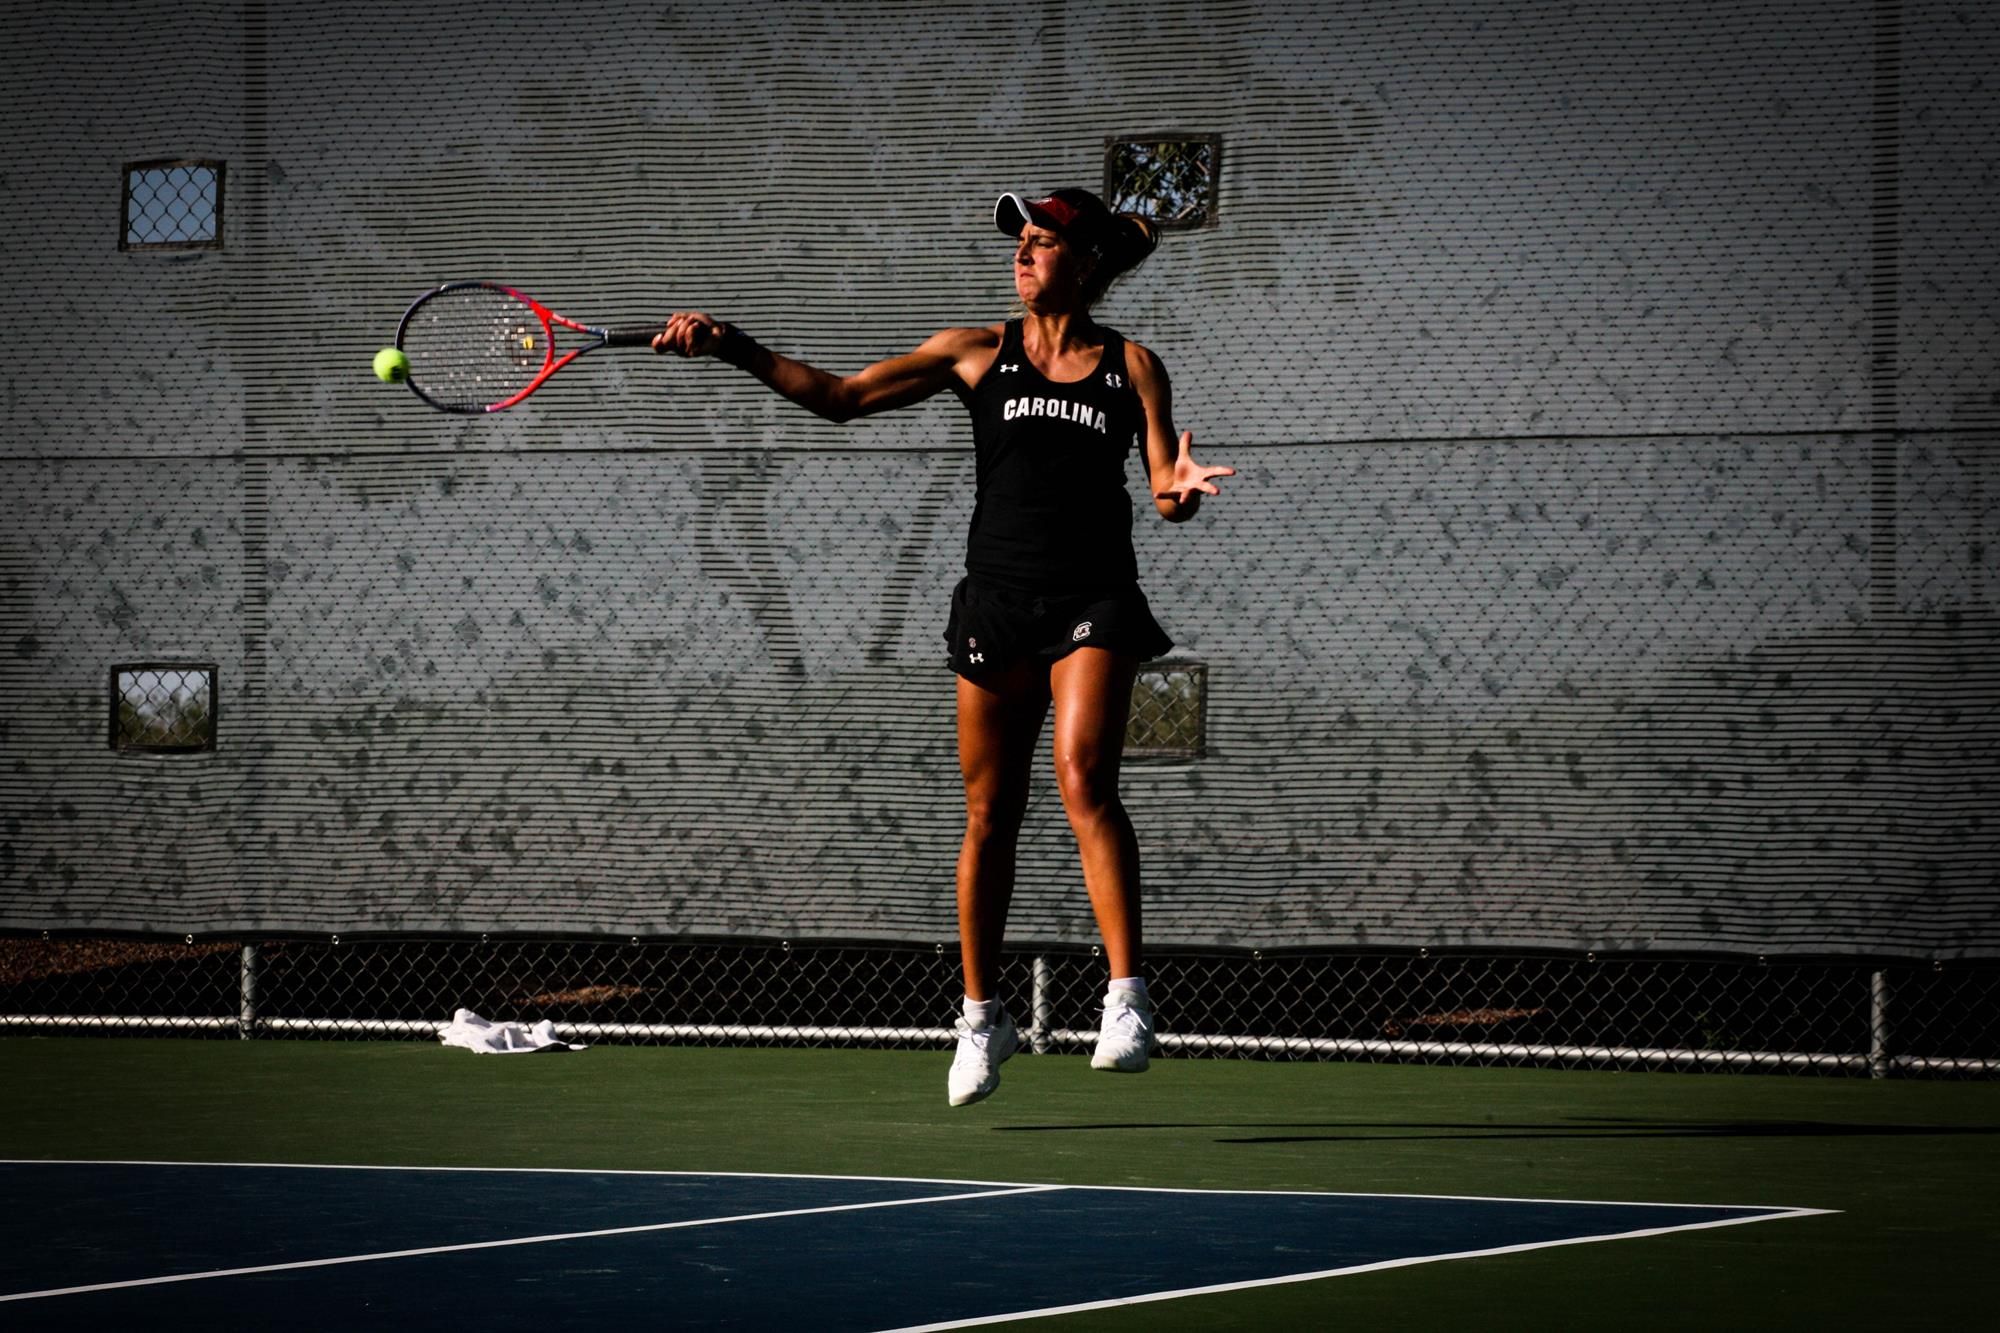 Horvit and Gamarra Martins Upend the No. 8 Seed at Oracle ITA National Fall Championships